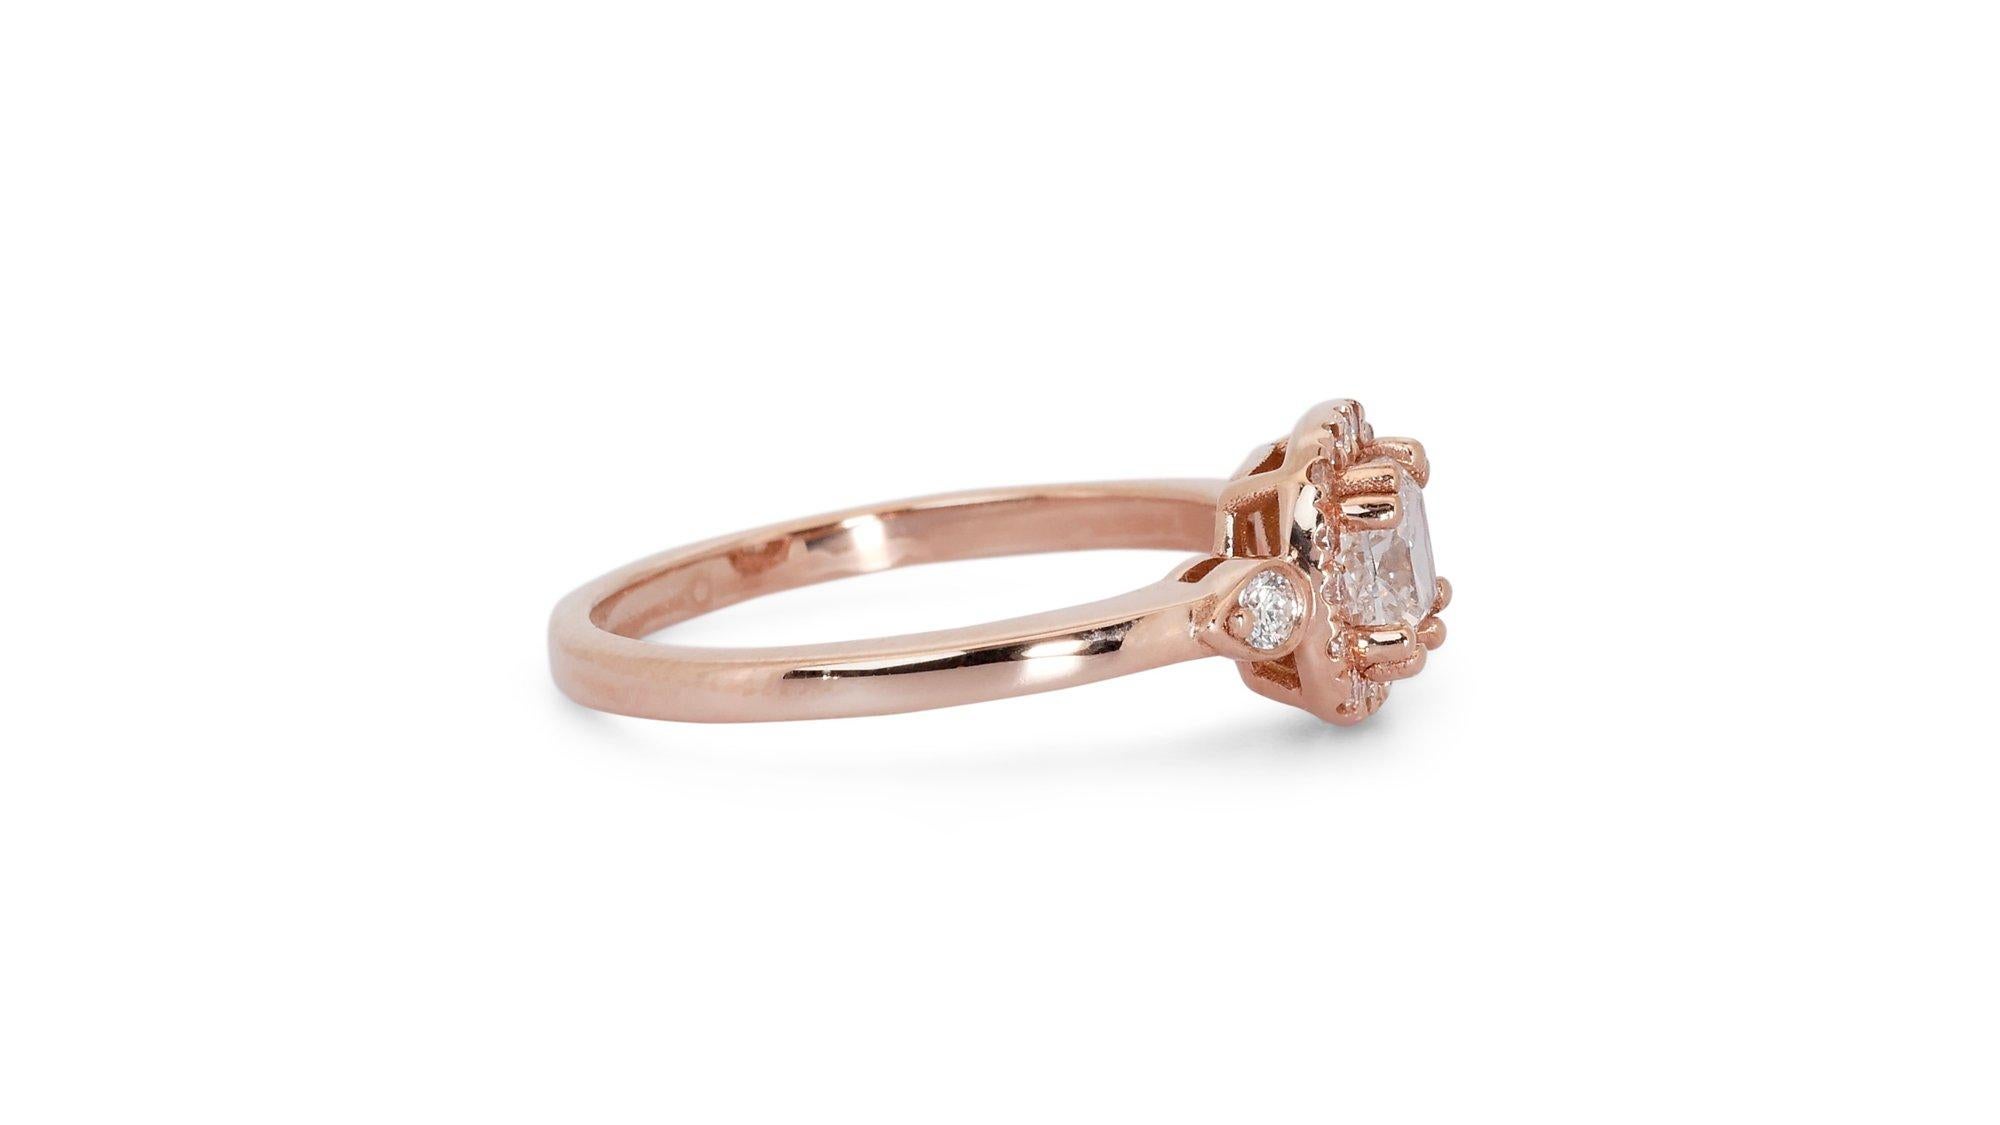 Dazzling 1.10ct Diamonds Halo Ring in 18k Rose Gold - GIA Certified In New Condition For Sale In רמת גן, IL